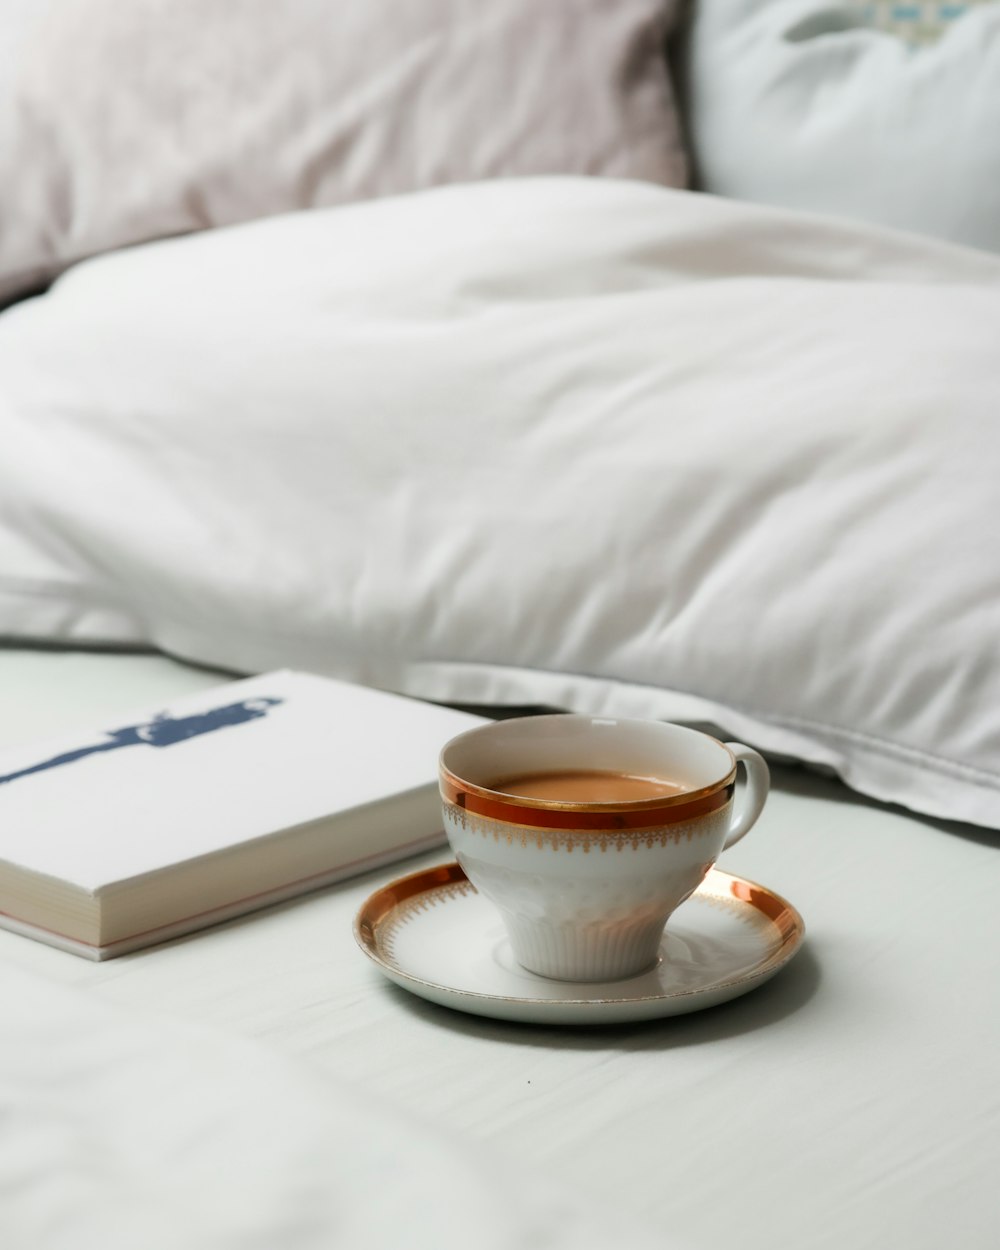 a cup of coffee on a saucer next to a book